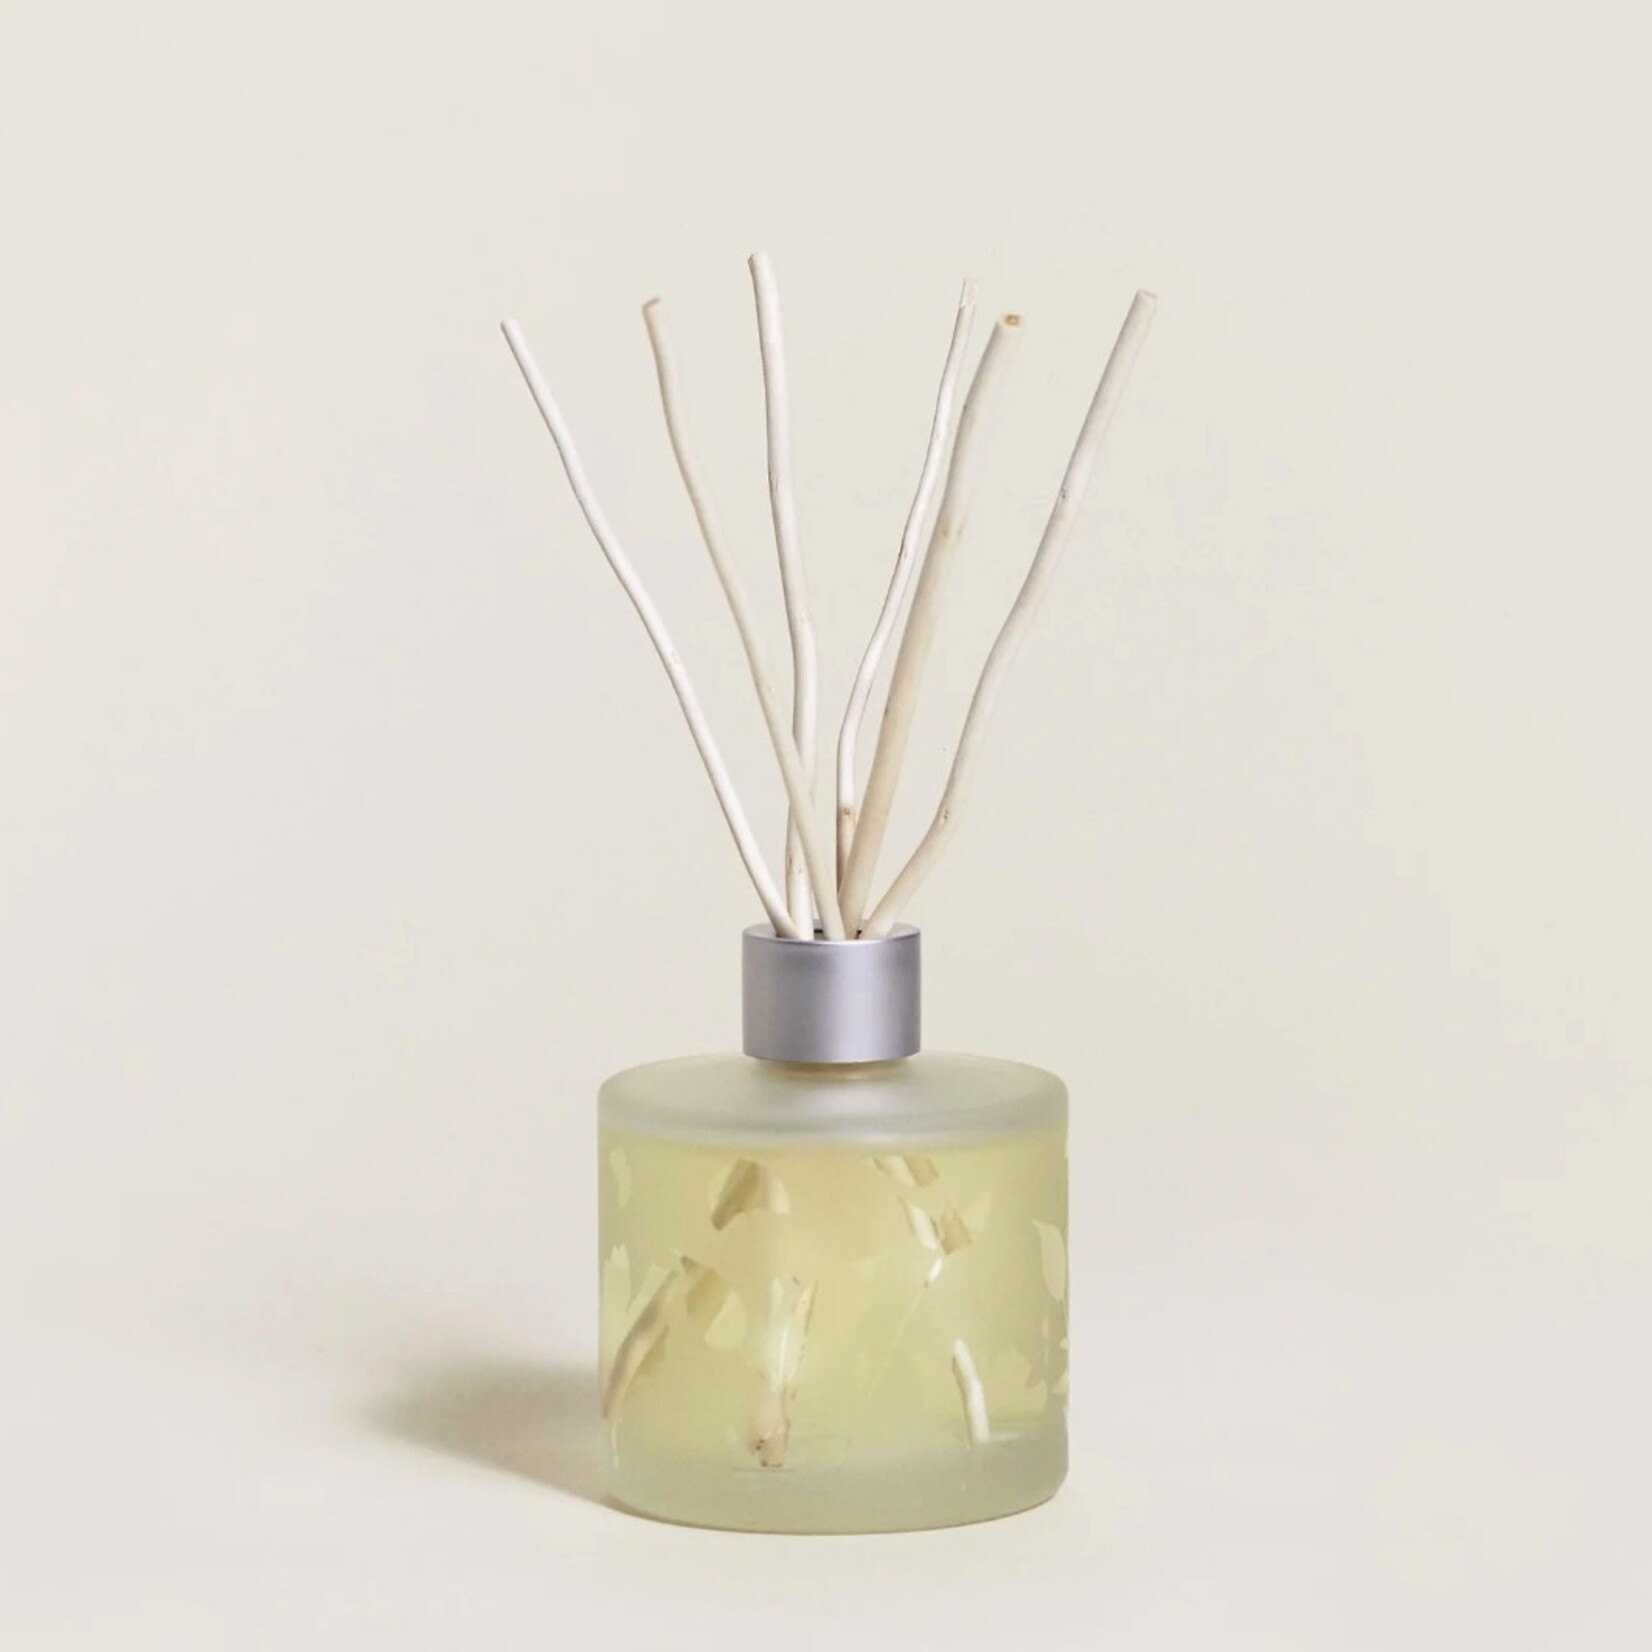 Maison Berger Paris Aroma Wake Up Pre-filled Reed Diffuser – Woody Breeze